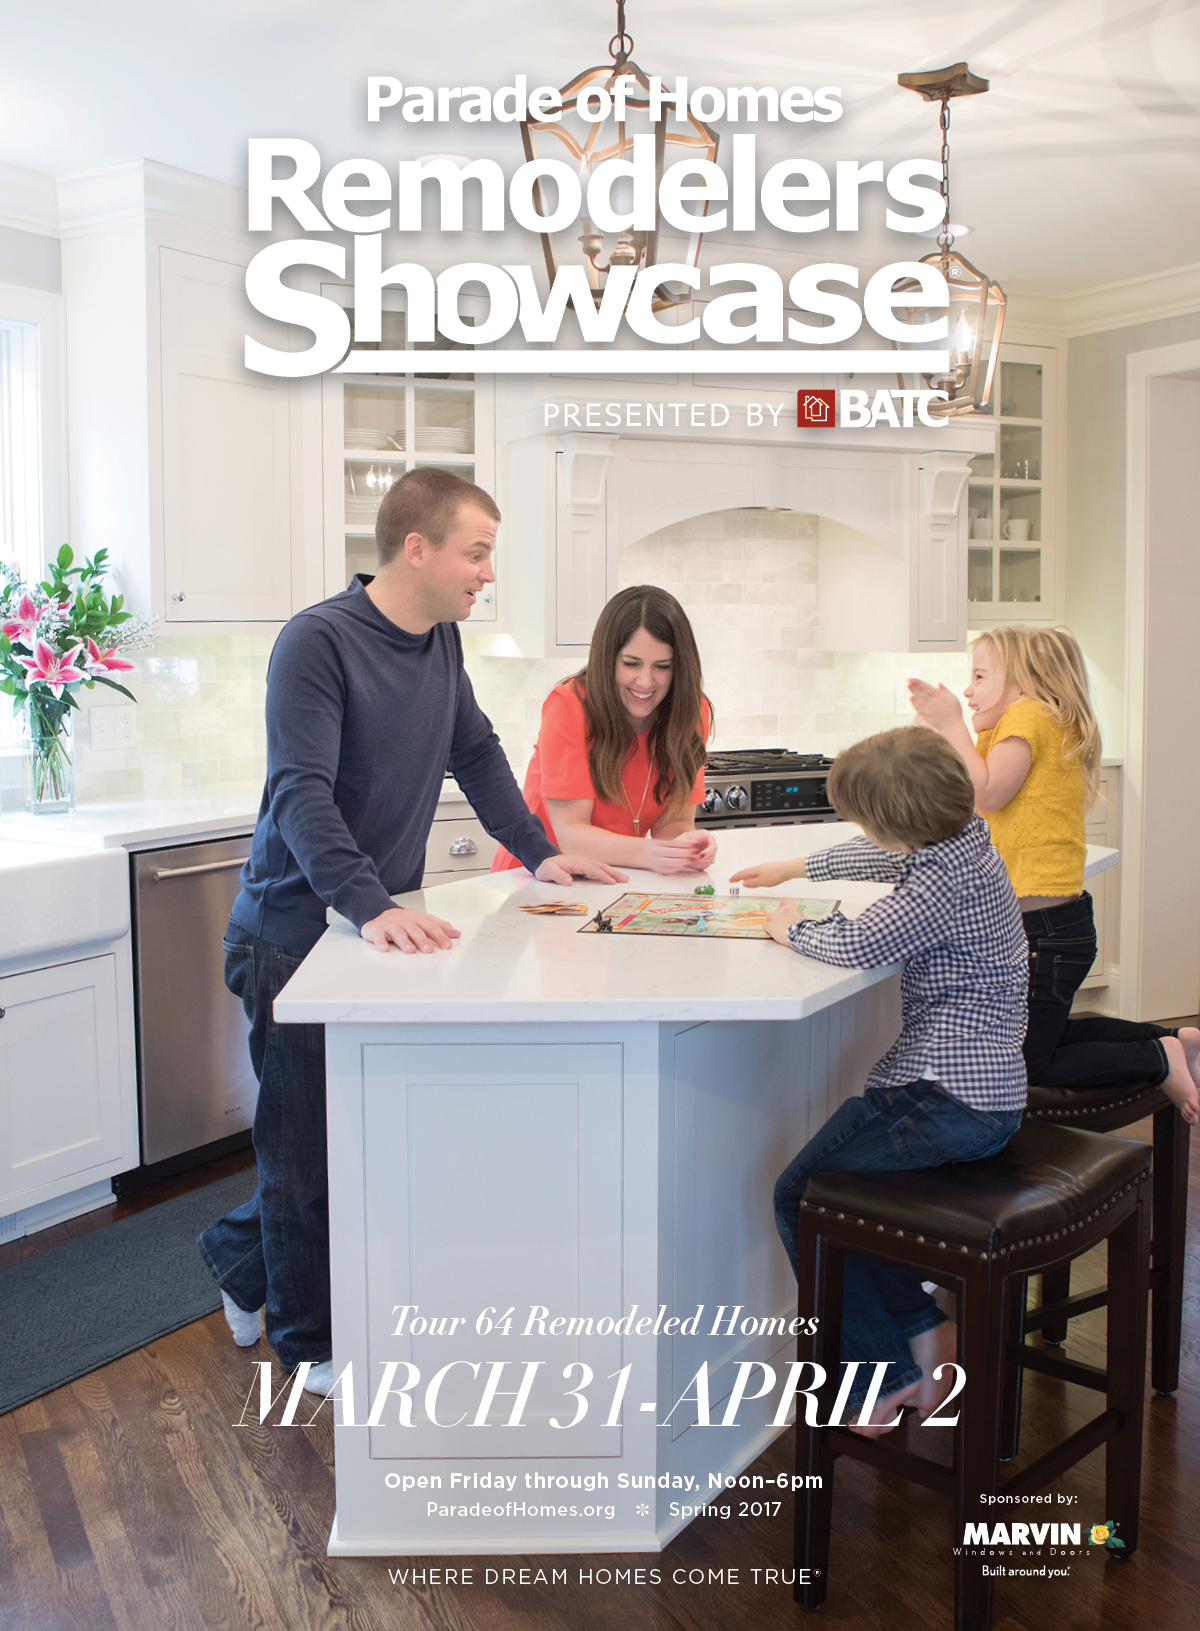 Image for Spring Parade of Homes Remodelers Showcase® Opens 64 Remodeled Homes to Tour